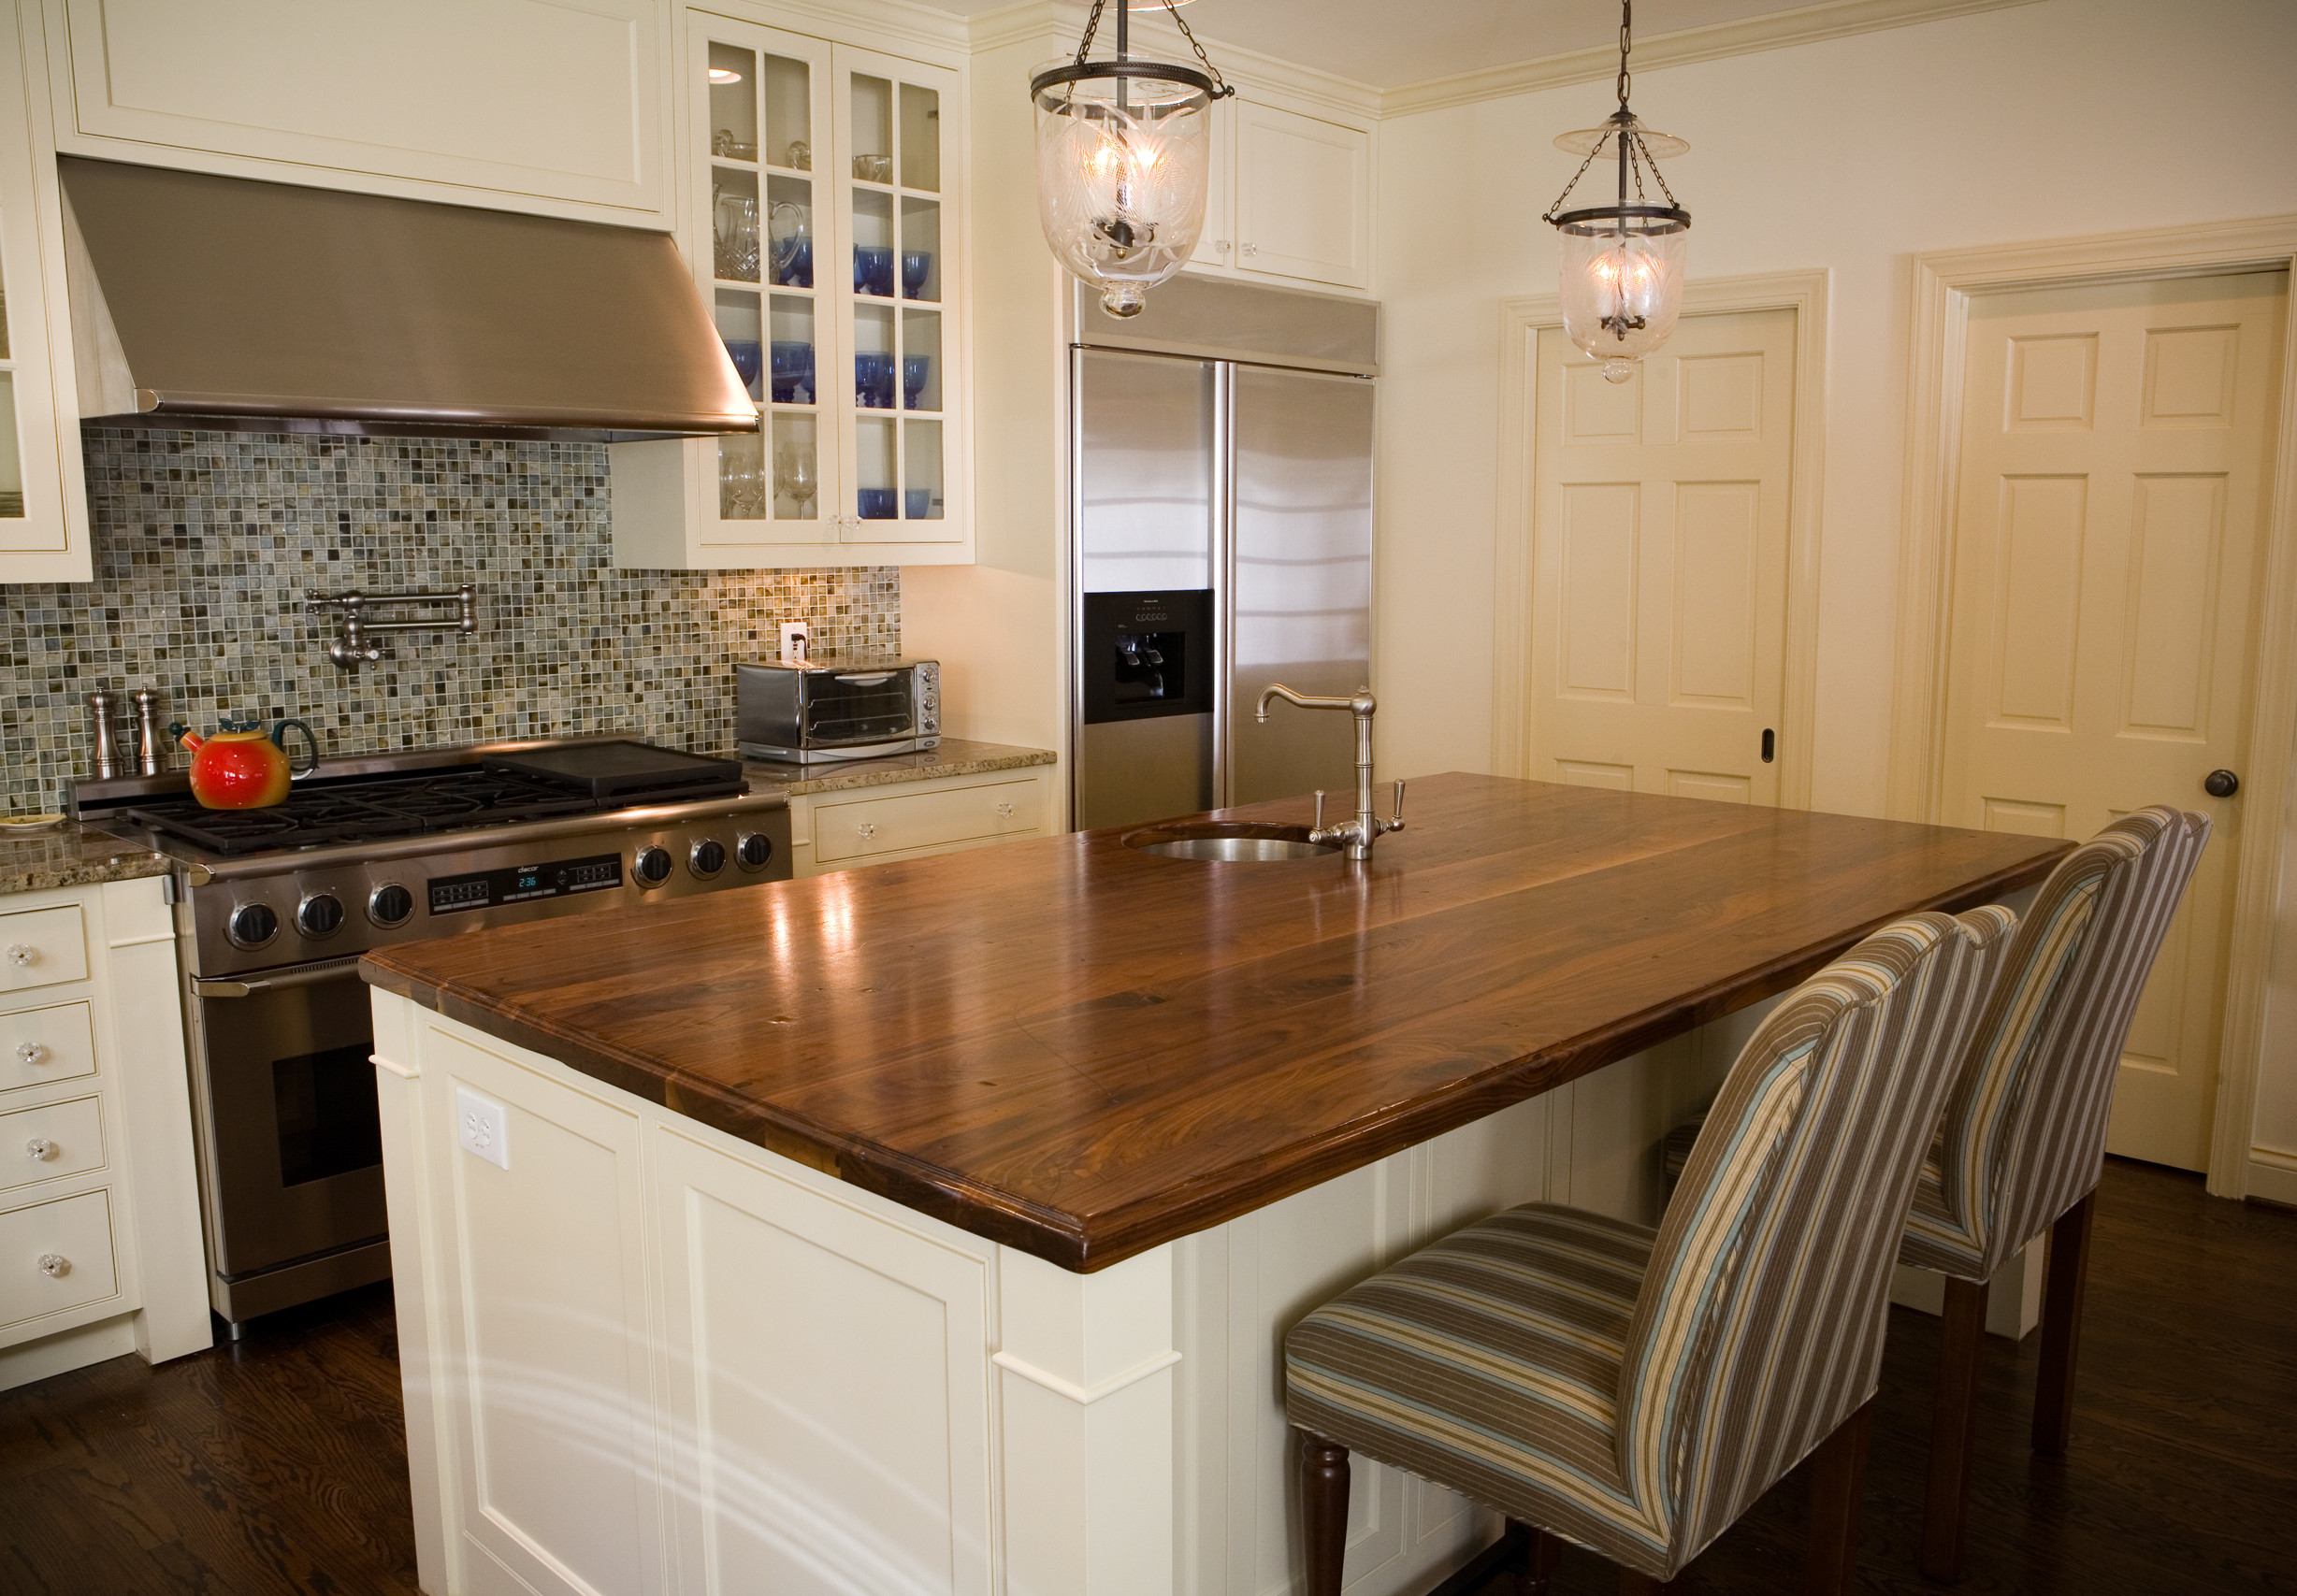 Kitchen Counter Cabinet
 All About Wood Kitchen Countertops You Have to Know